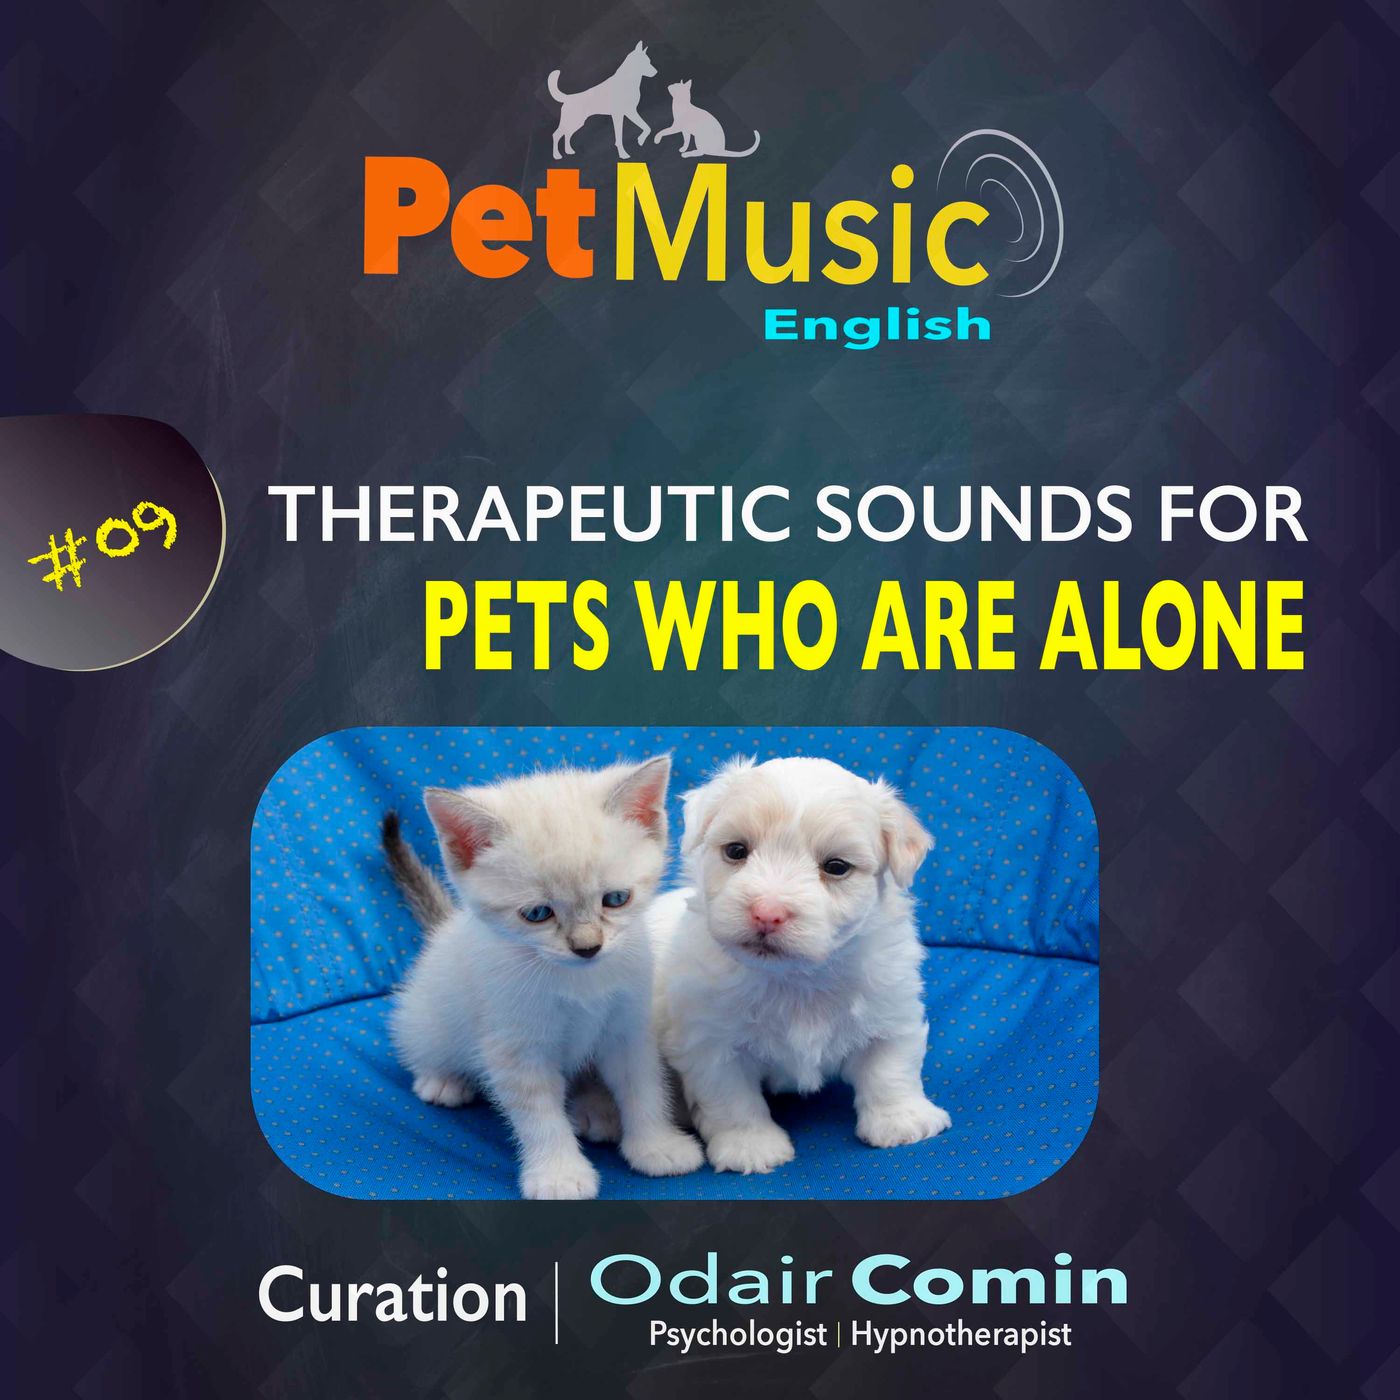 #09 Therapeutic Sounds for Pets who are Alone | PetMusic